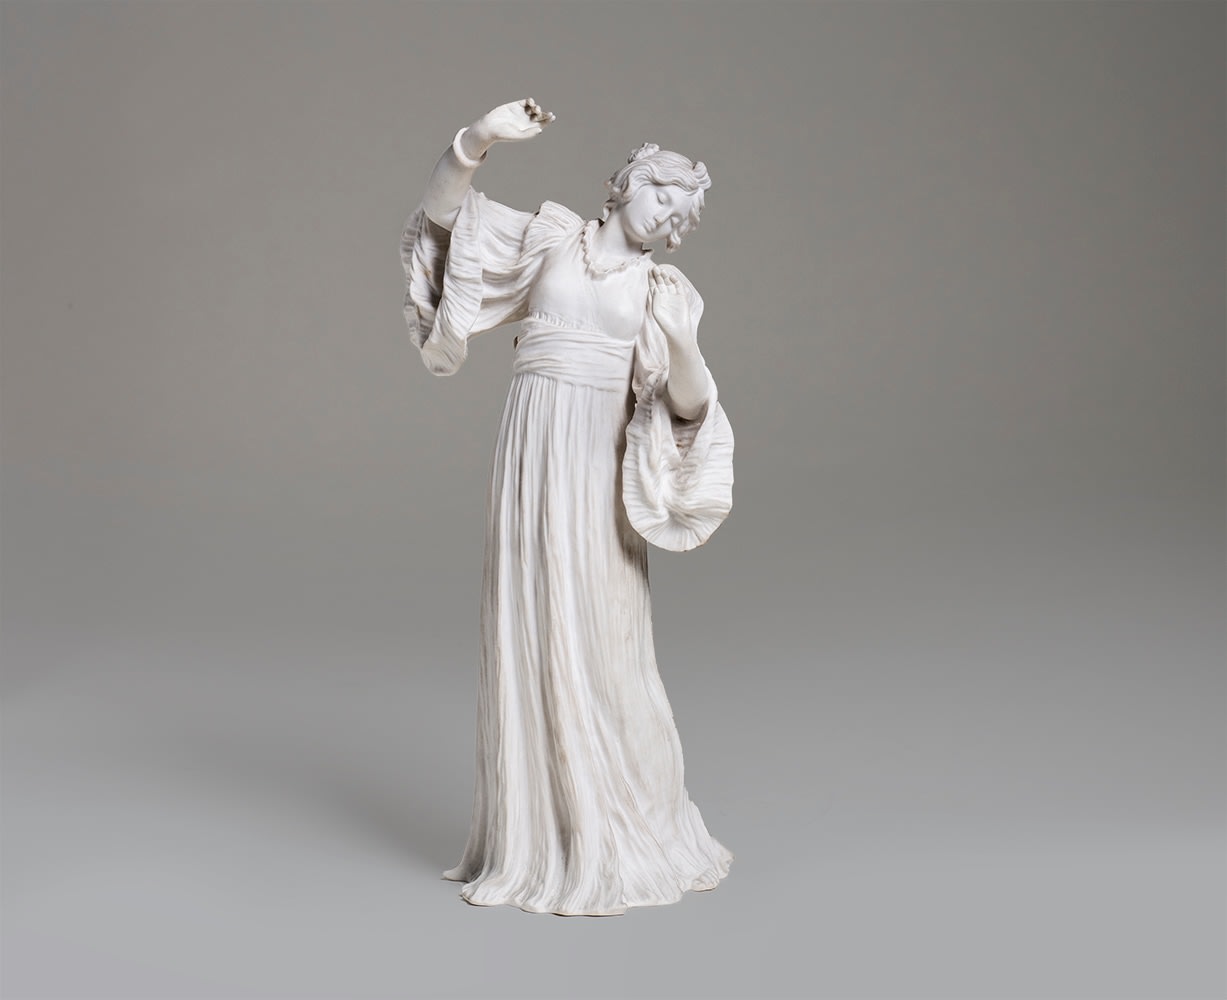 a bisque porcelain sculpture of french &quot;Scarf Dancer&quot; Loie Fuller, with her signature flowy dress with billowing sleeves giving the figure a sense of motion